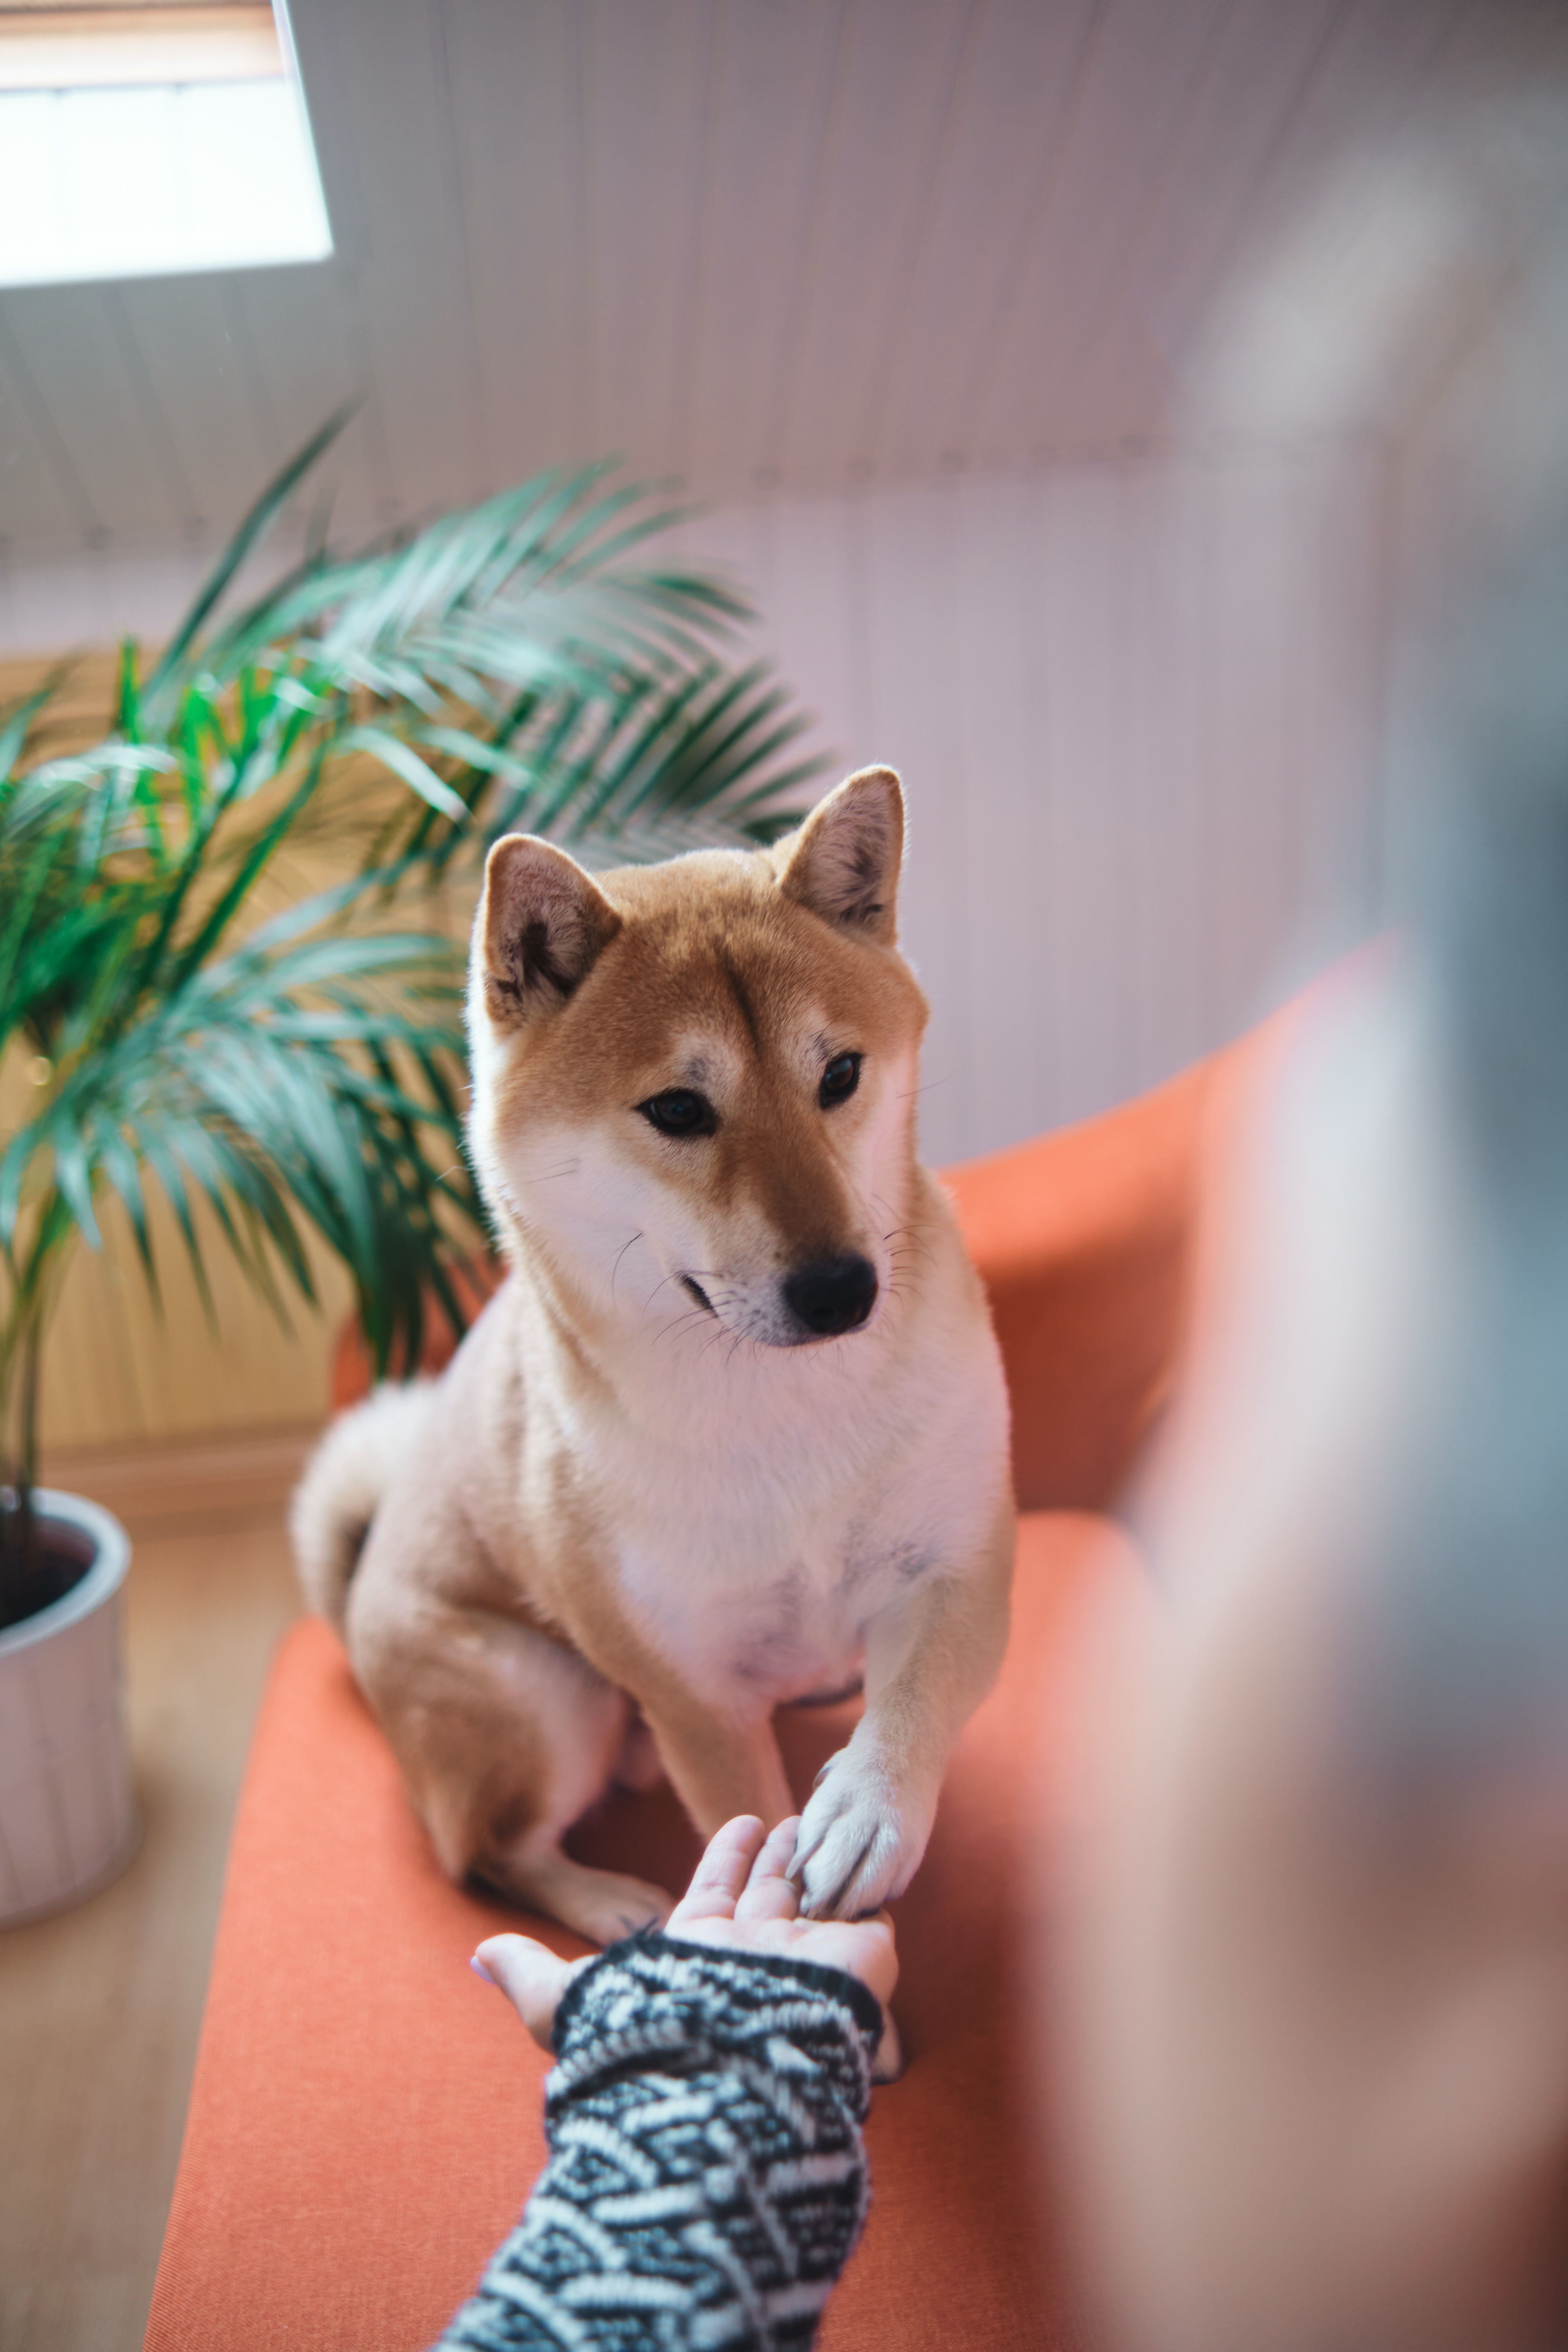 5 Fun Brain Games to Test Your Dog's Intelligence - The Online Dog Trainer